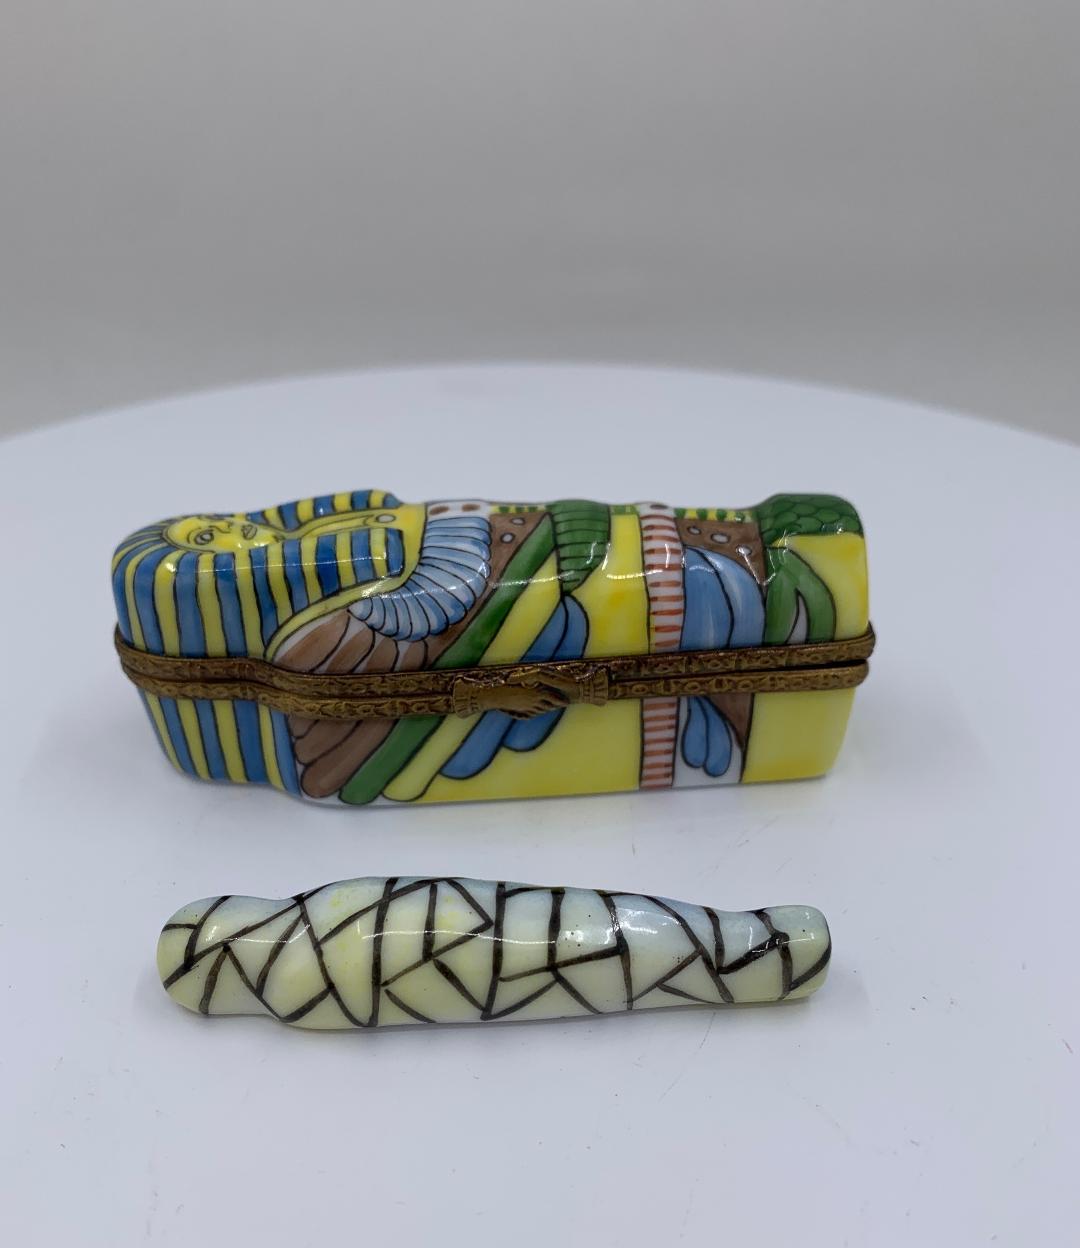 Collectible handmade and finely hand painted estate Limoges France porcelain miniature King Tutankhamun or King Tut sarcophagus shaped trinket box features a very detailed hand painted exterior. Open the box and inside reveals a hand painted